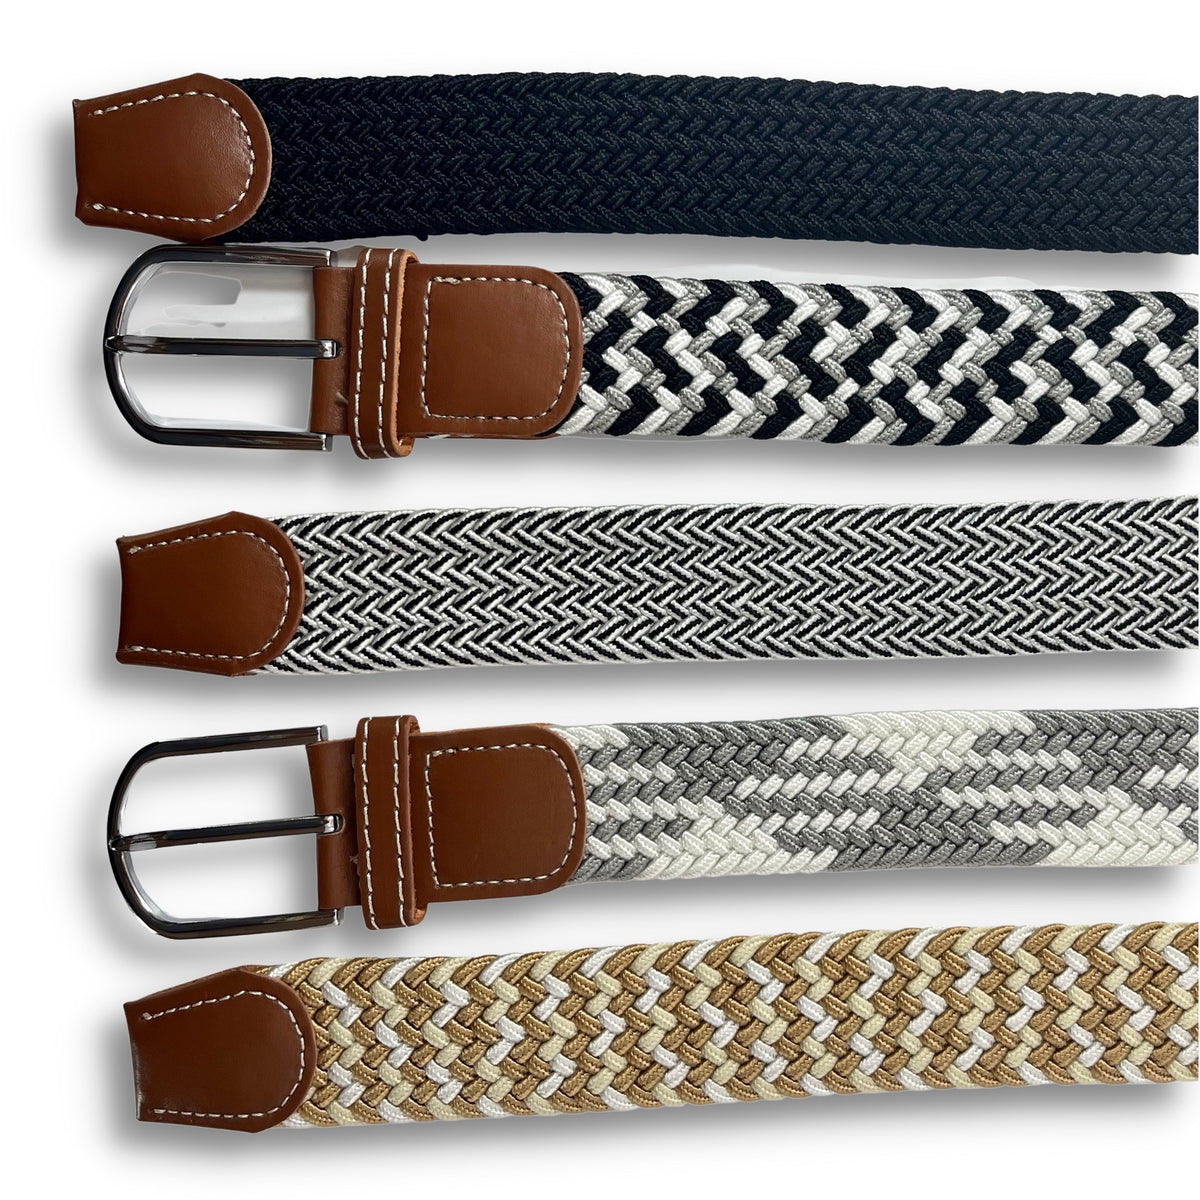 Varying monochromatic elastic belts, with silver buckles and brown leather ends.